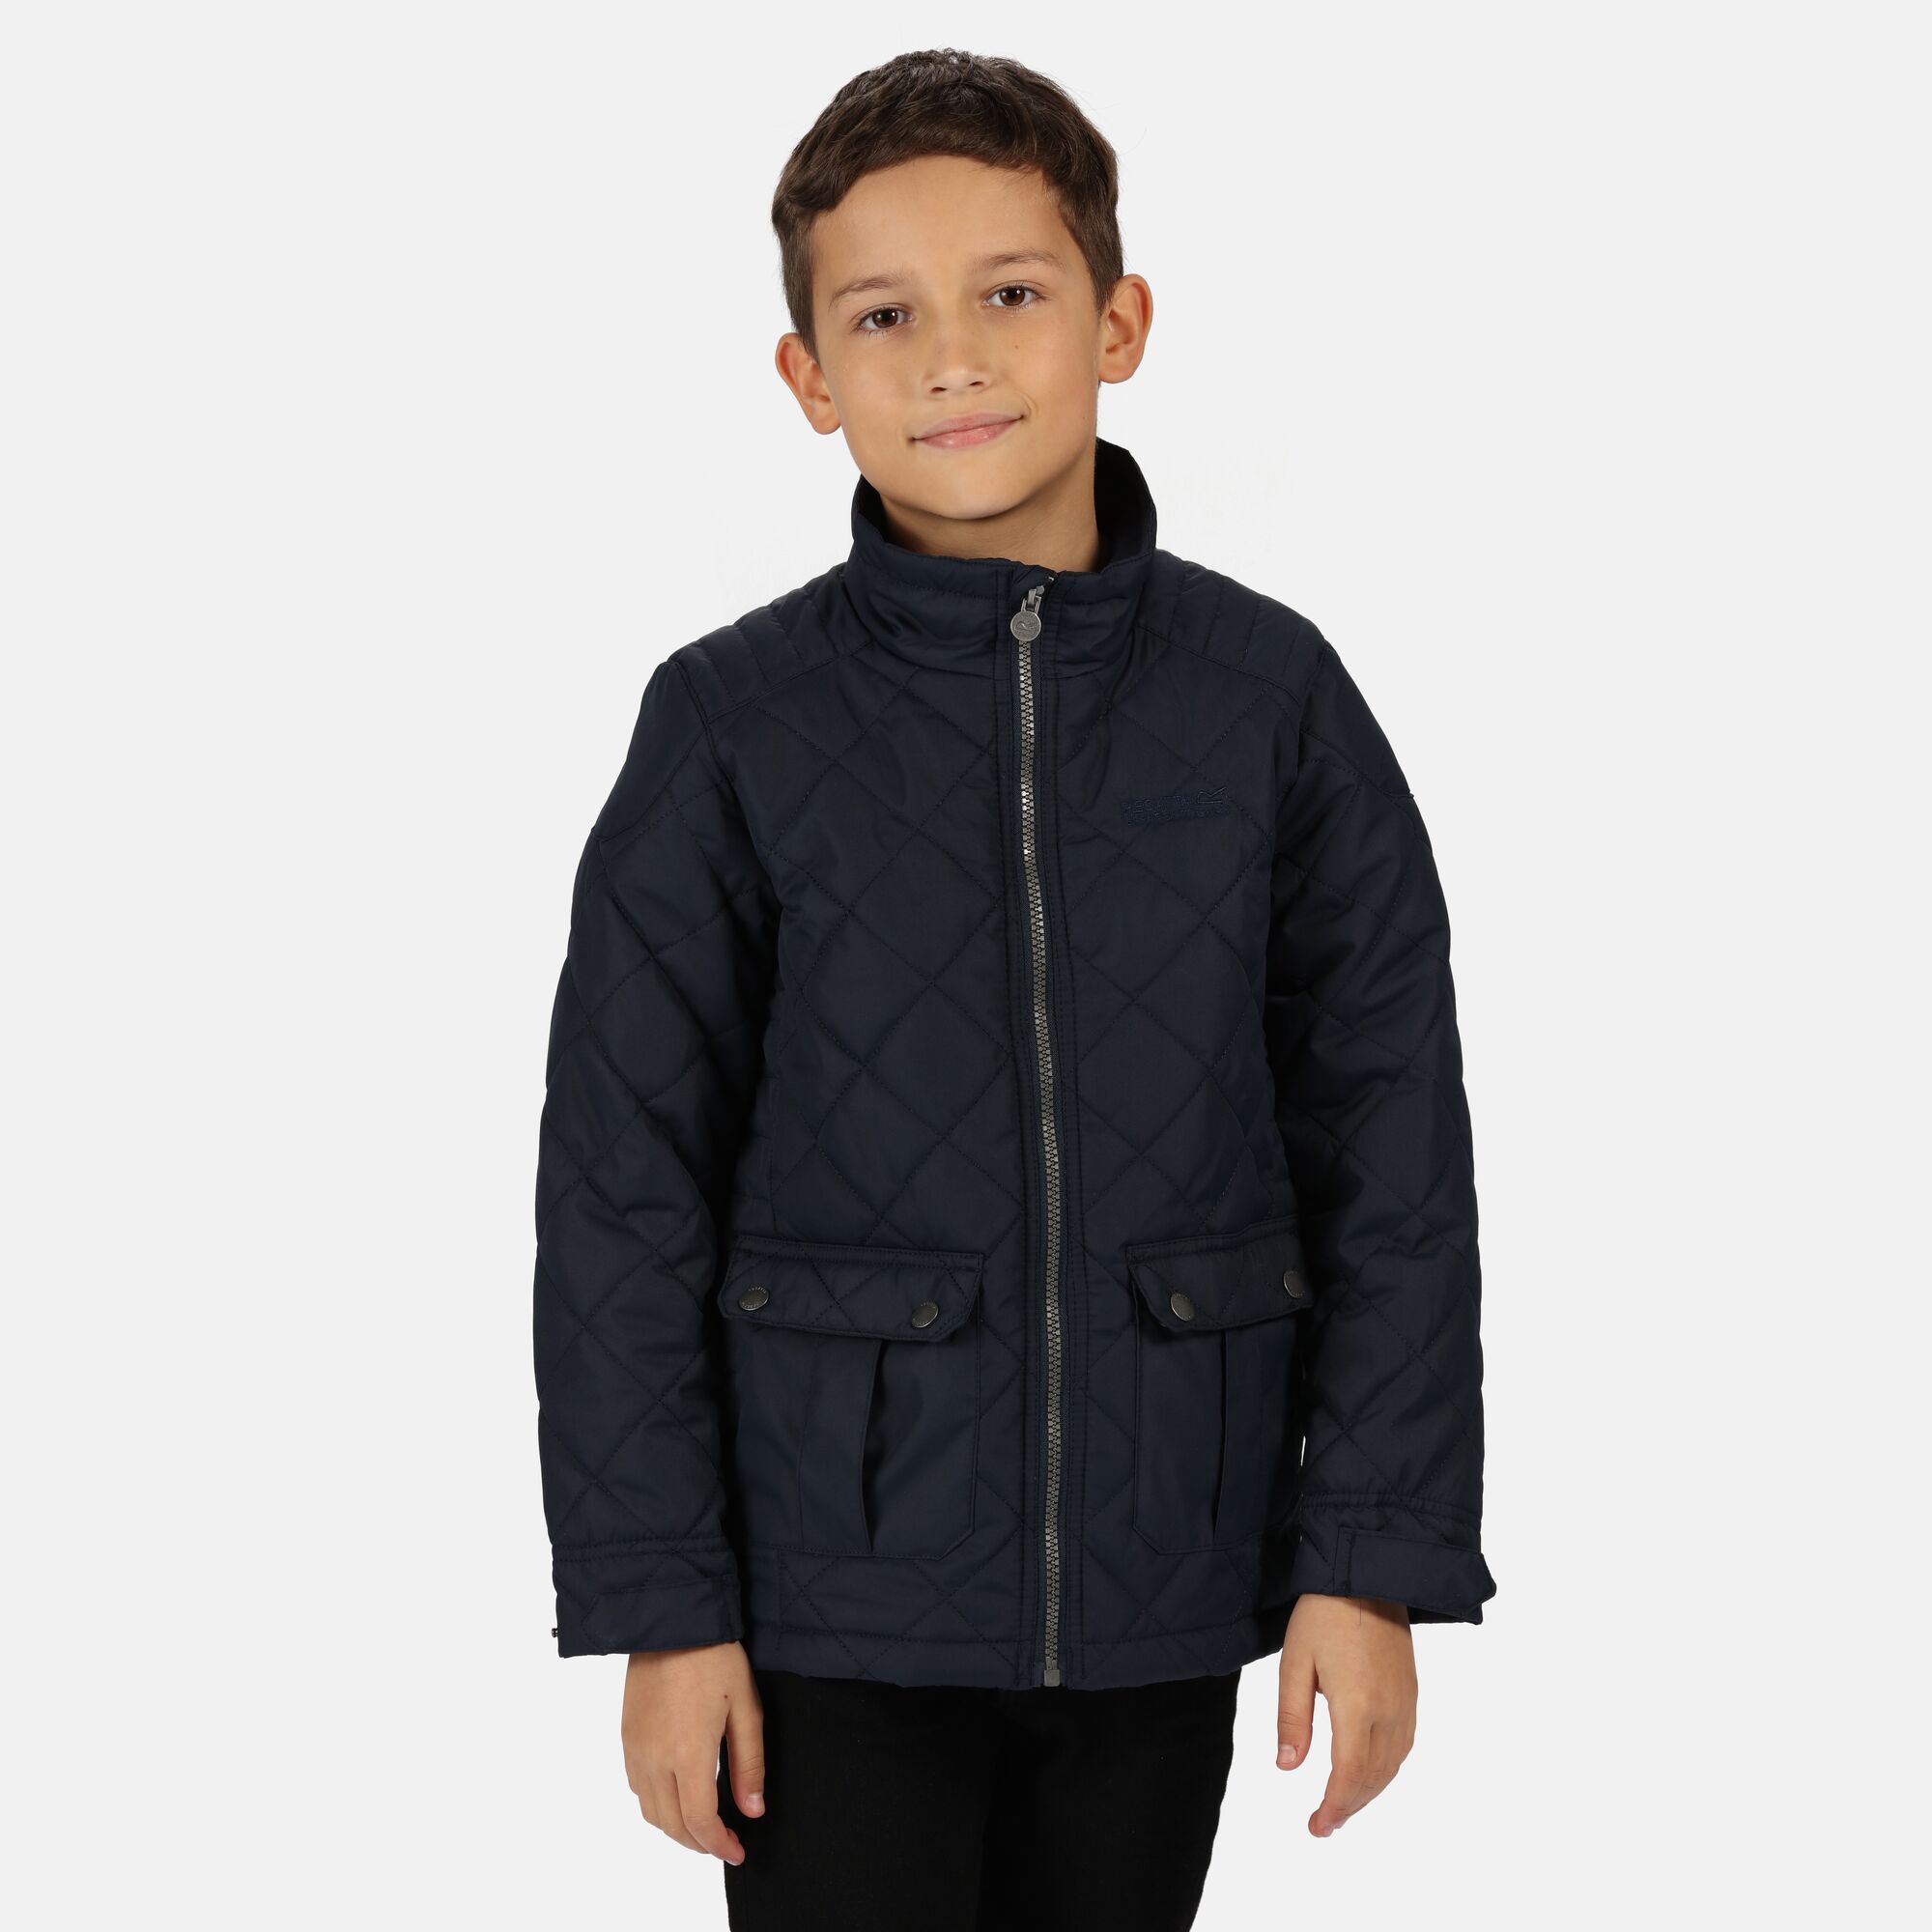 Material: 100% polyester. Water repellent quilted micro poplin fabric. Thermo-guard insulation. 100% polyester taffeta printed lining. 2 x lower patch pockets with branded snap fastenings. Back vents with stud fastening.